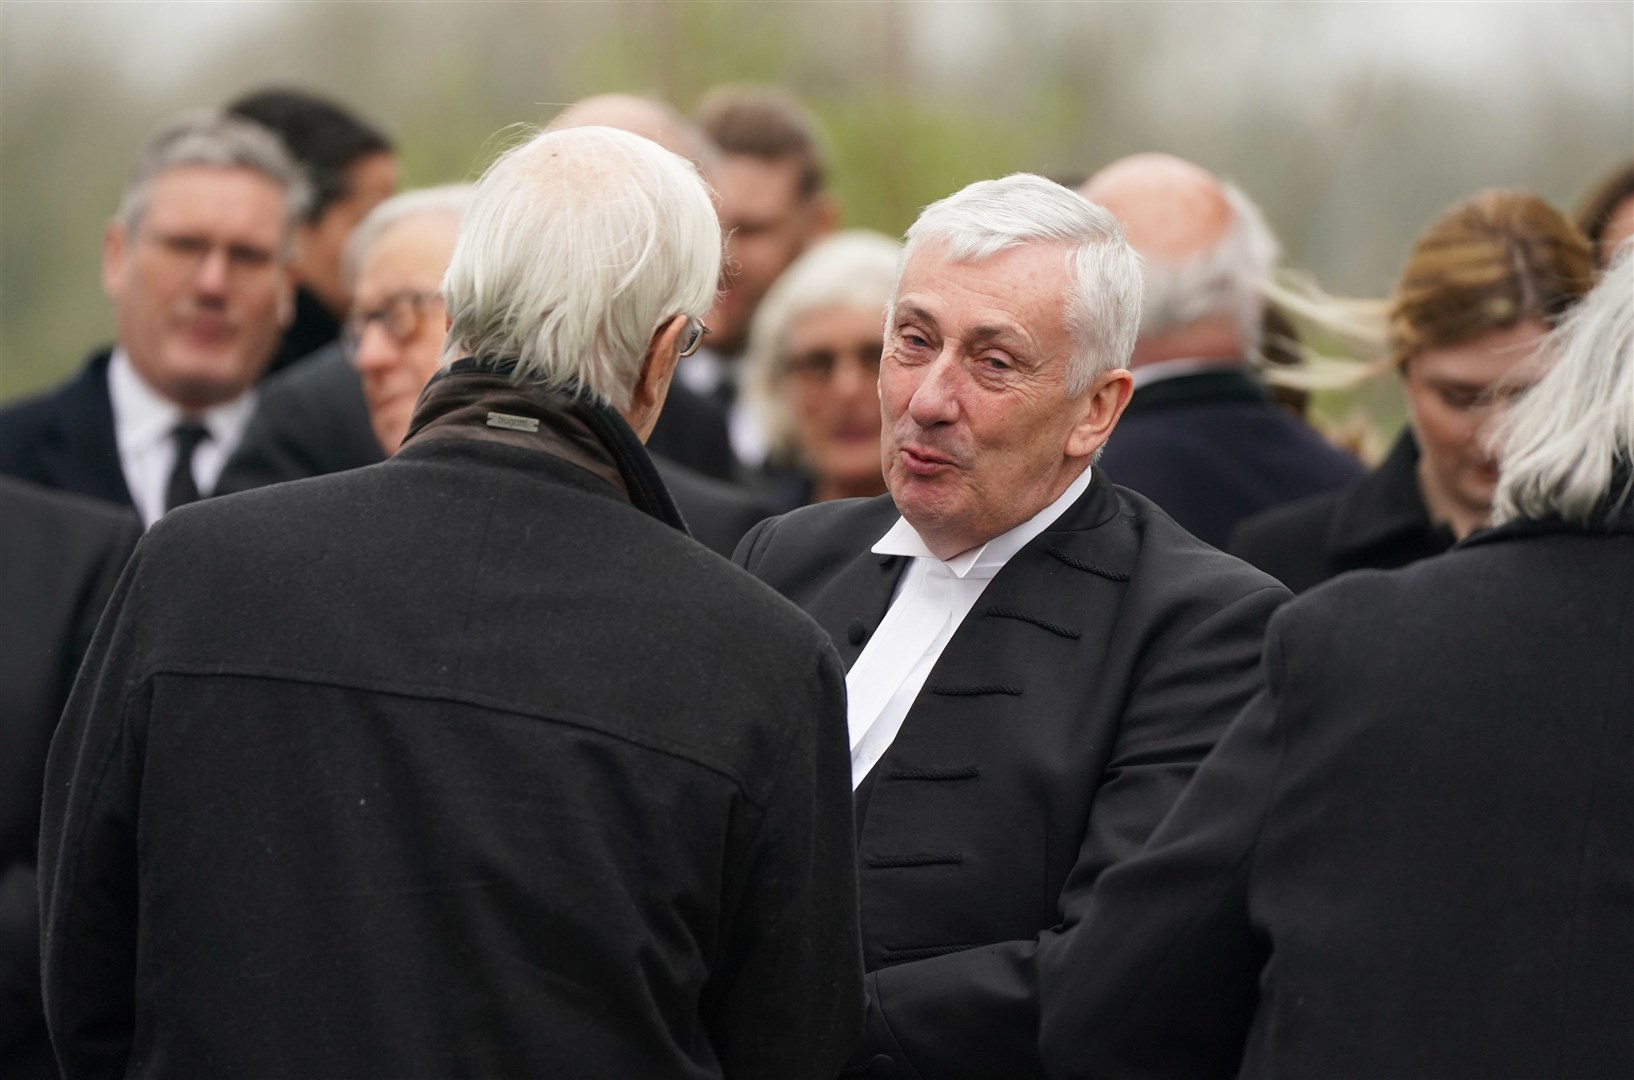 Speaker of the House of Commons, Sir Lindsay Hoyle following the funeral (Joe Giddens/PA)